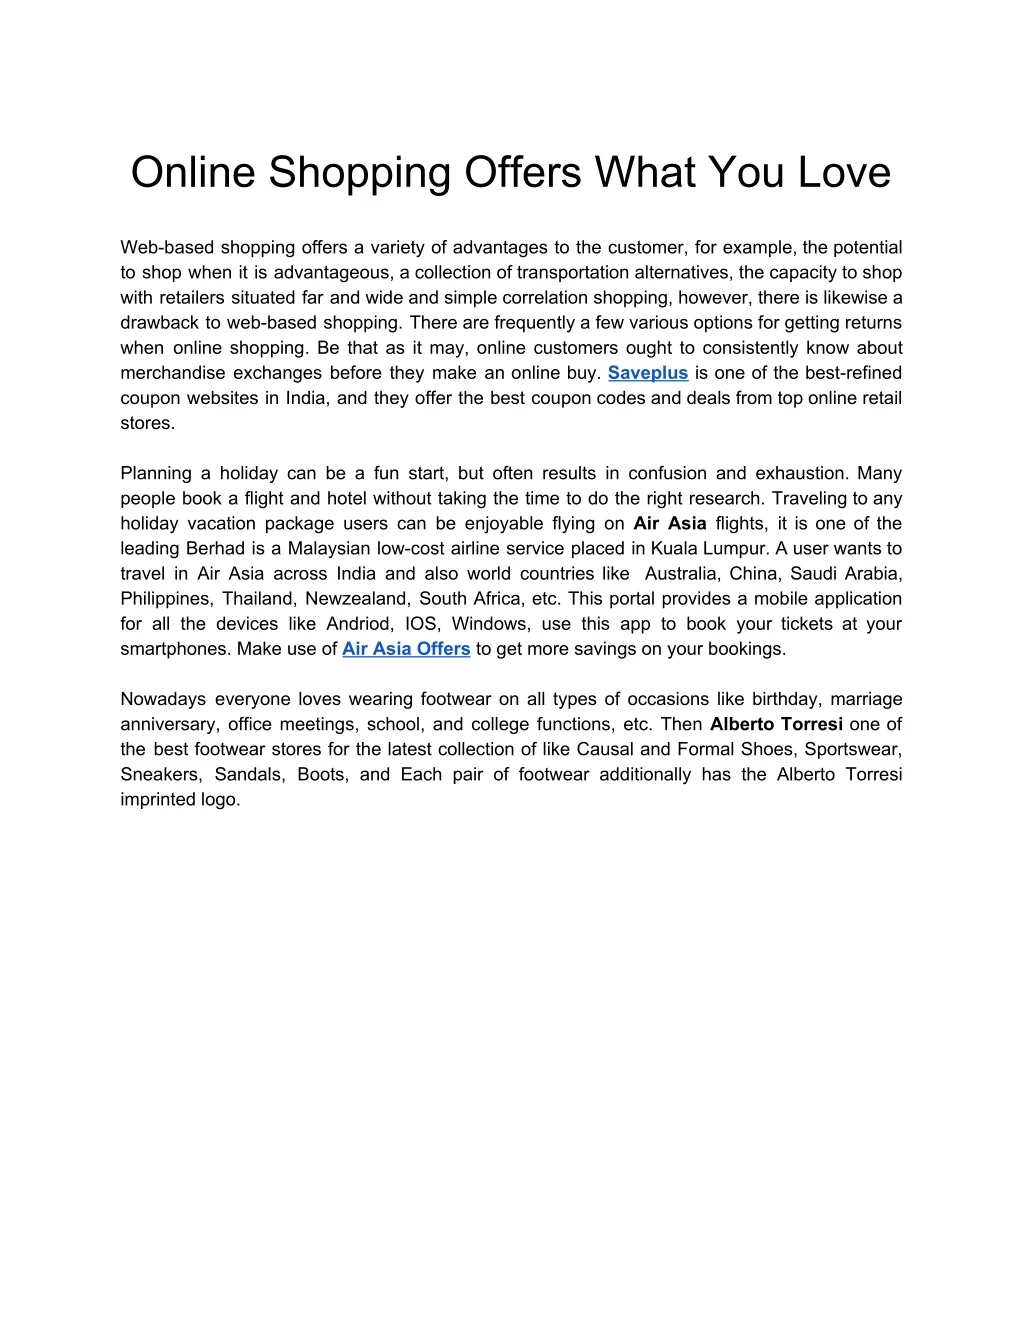 online shopping offers what you love